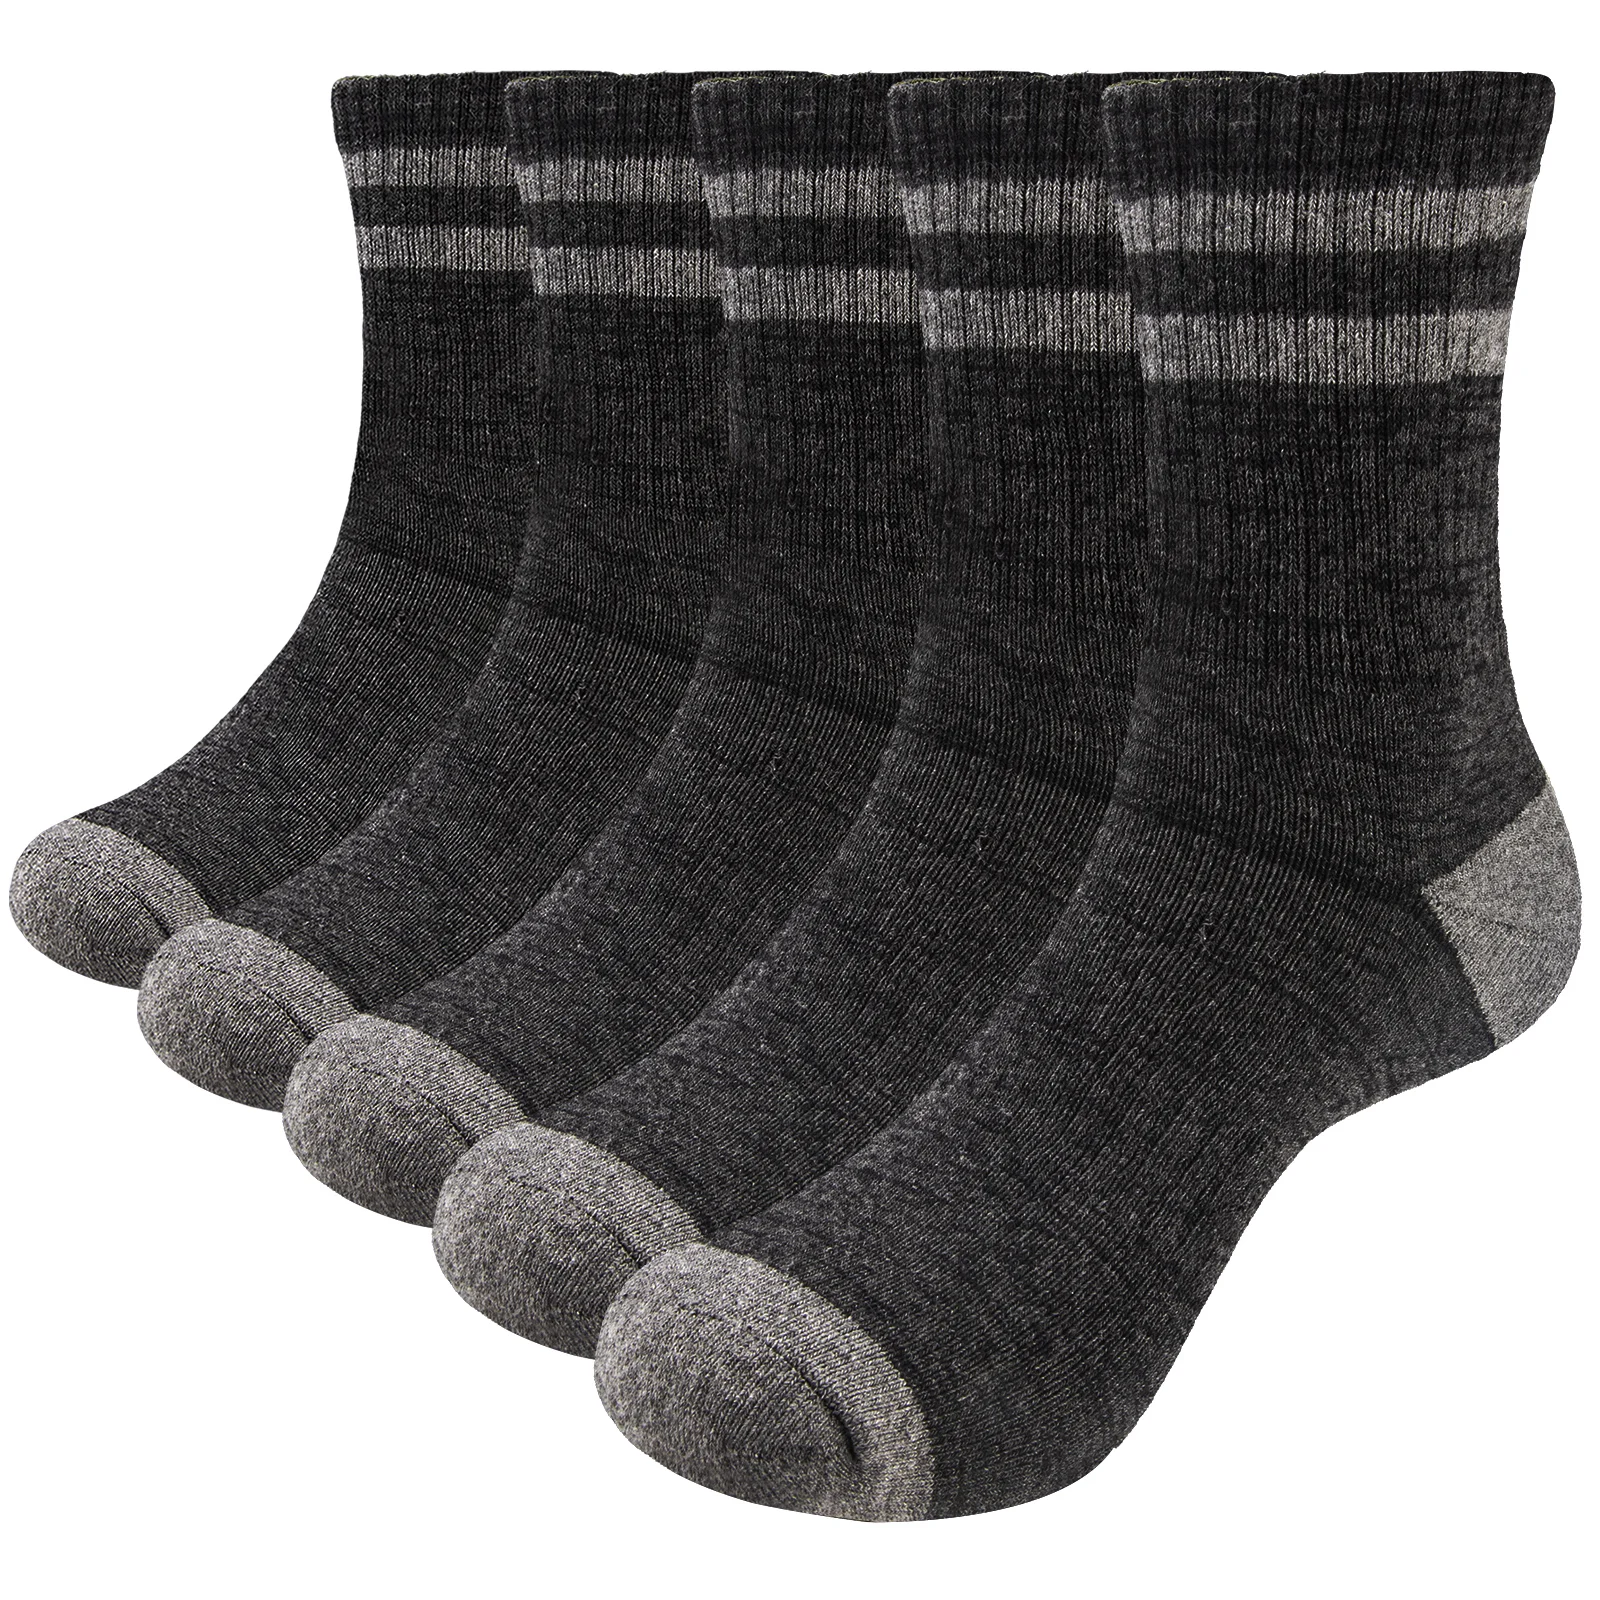 YUEDGE  5 Pairs Men's Cotton Deodorant Winter Warm Breathable Male Thick Casual Cushion Crew Socks EU Size 37-46